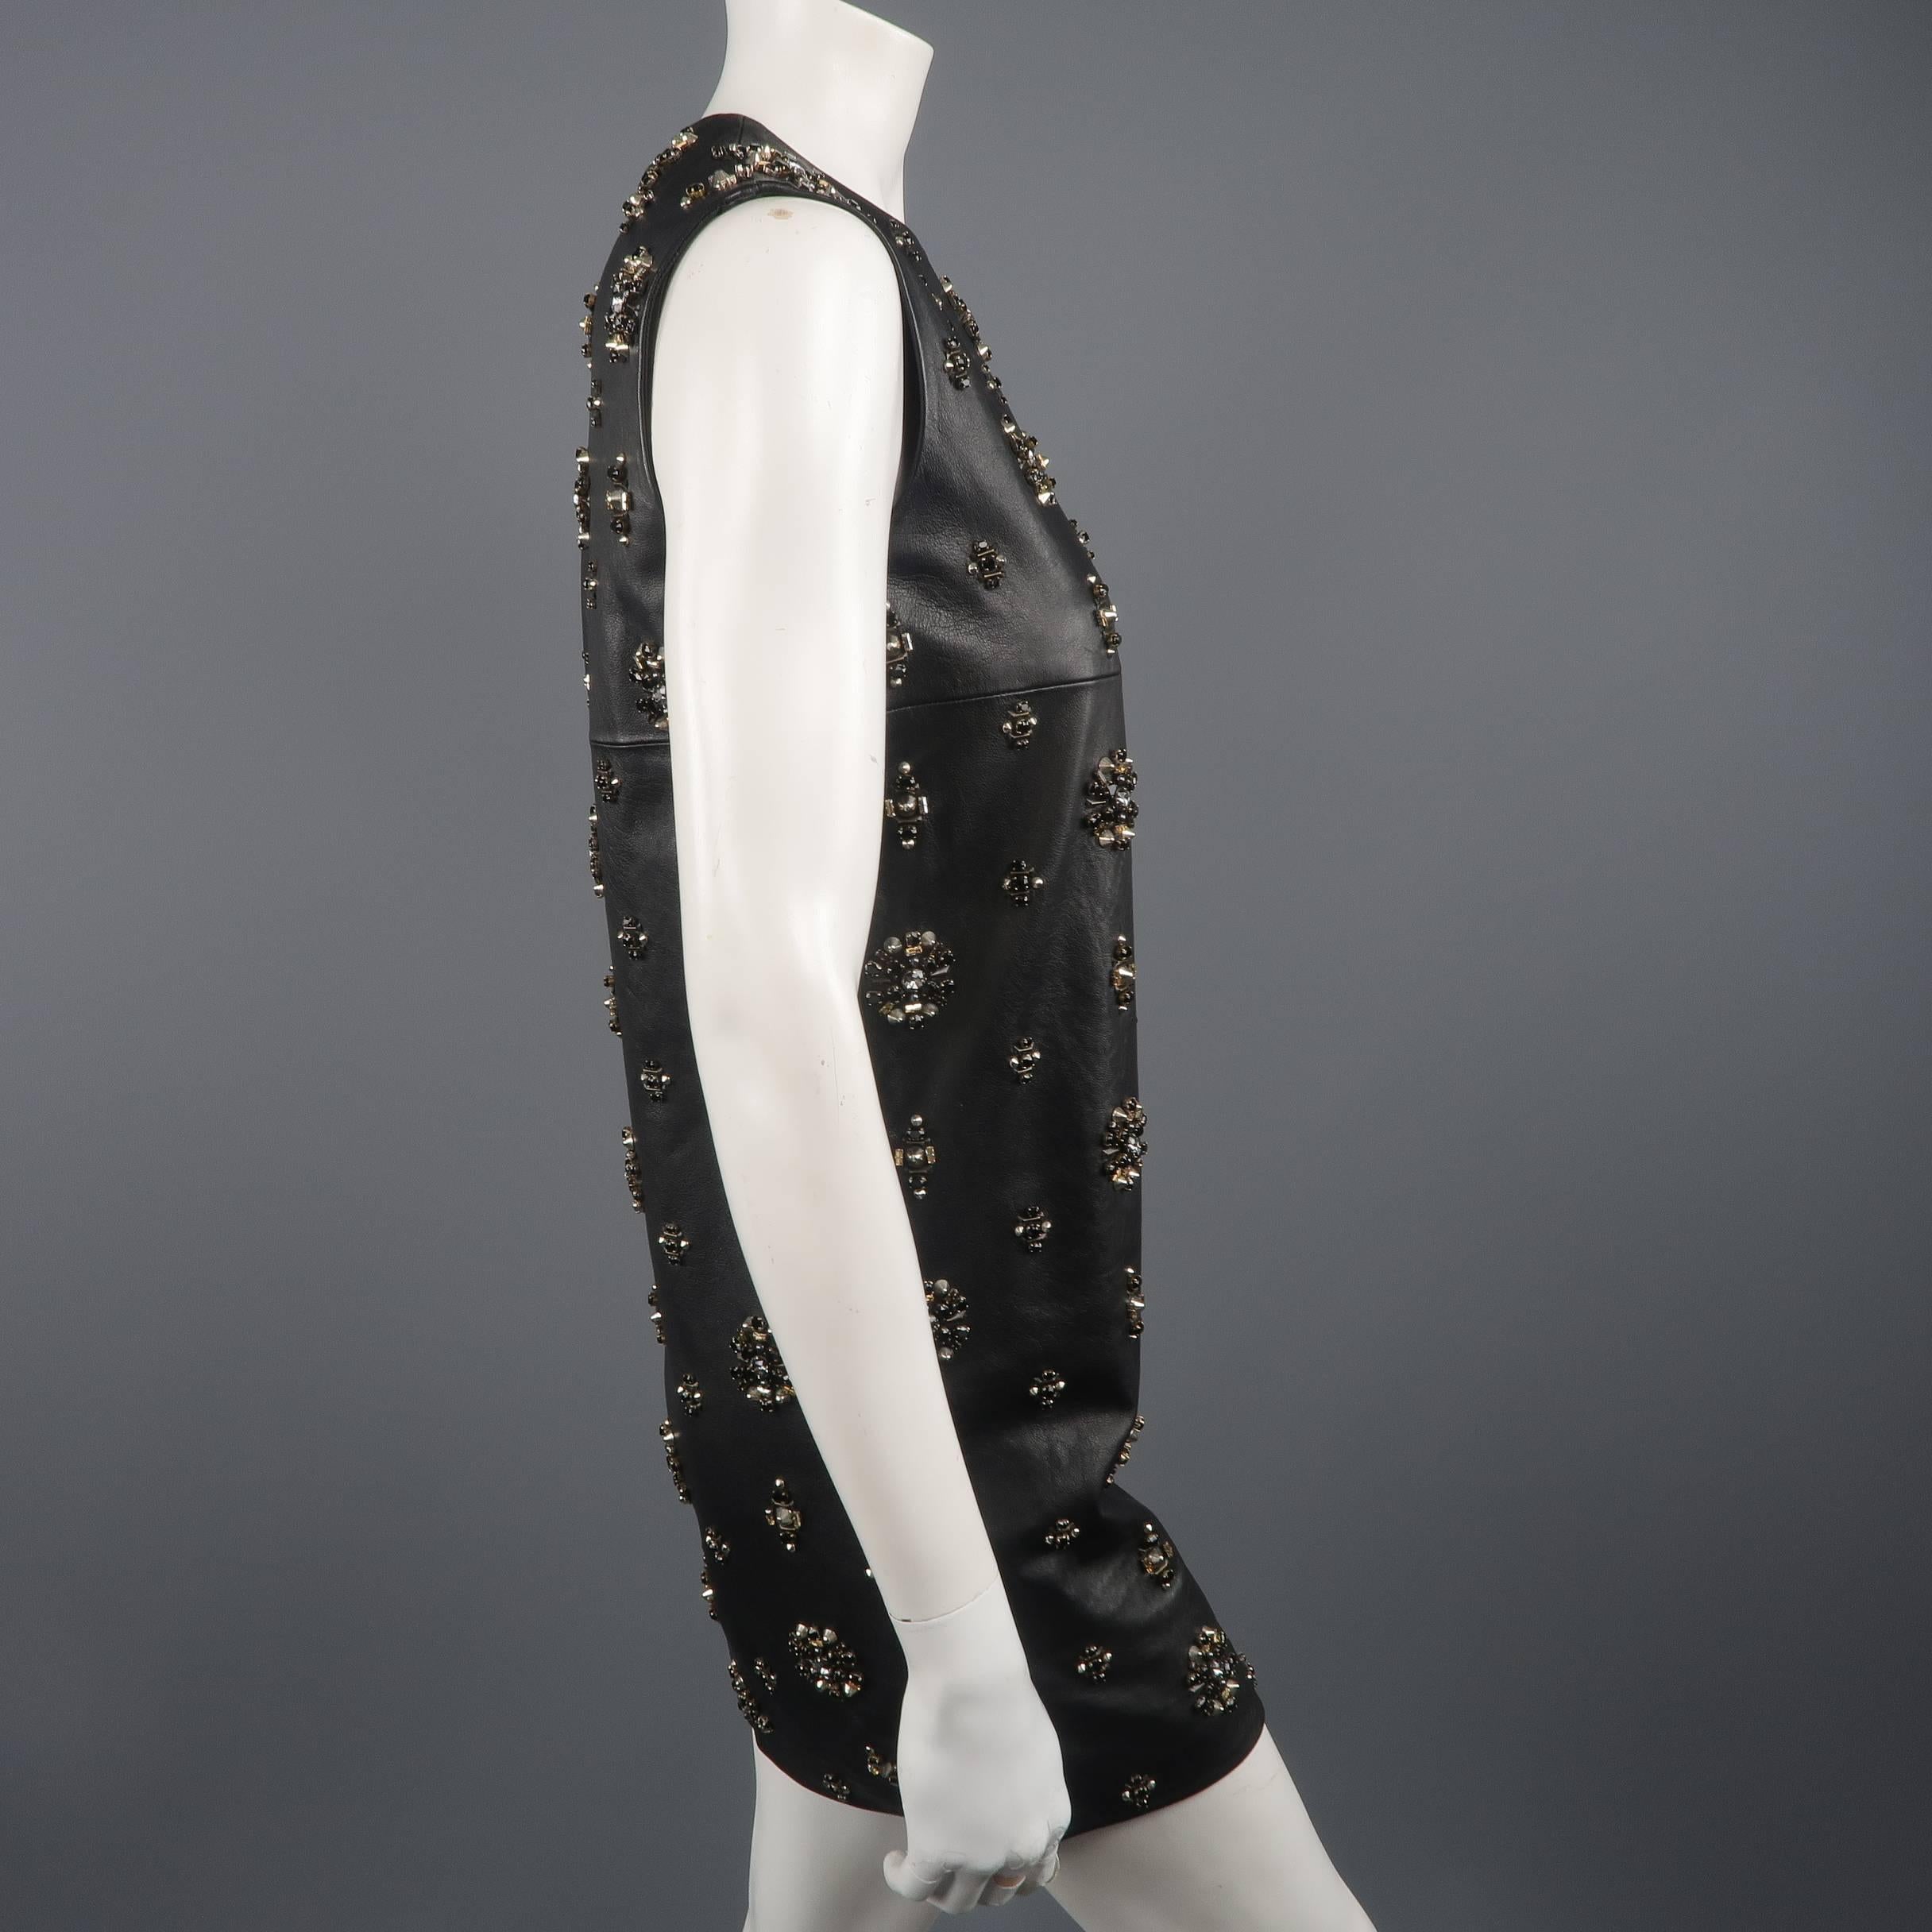 Saint Laurent by Hedi Slimane Embellished Leather Runway Dress, Fall 2013 In Excellent Condition In San Francisco, CA